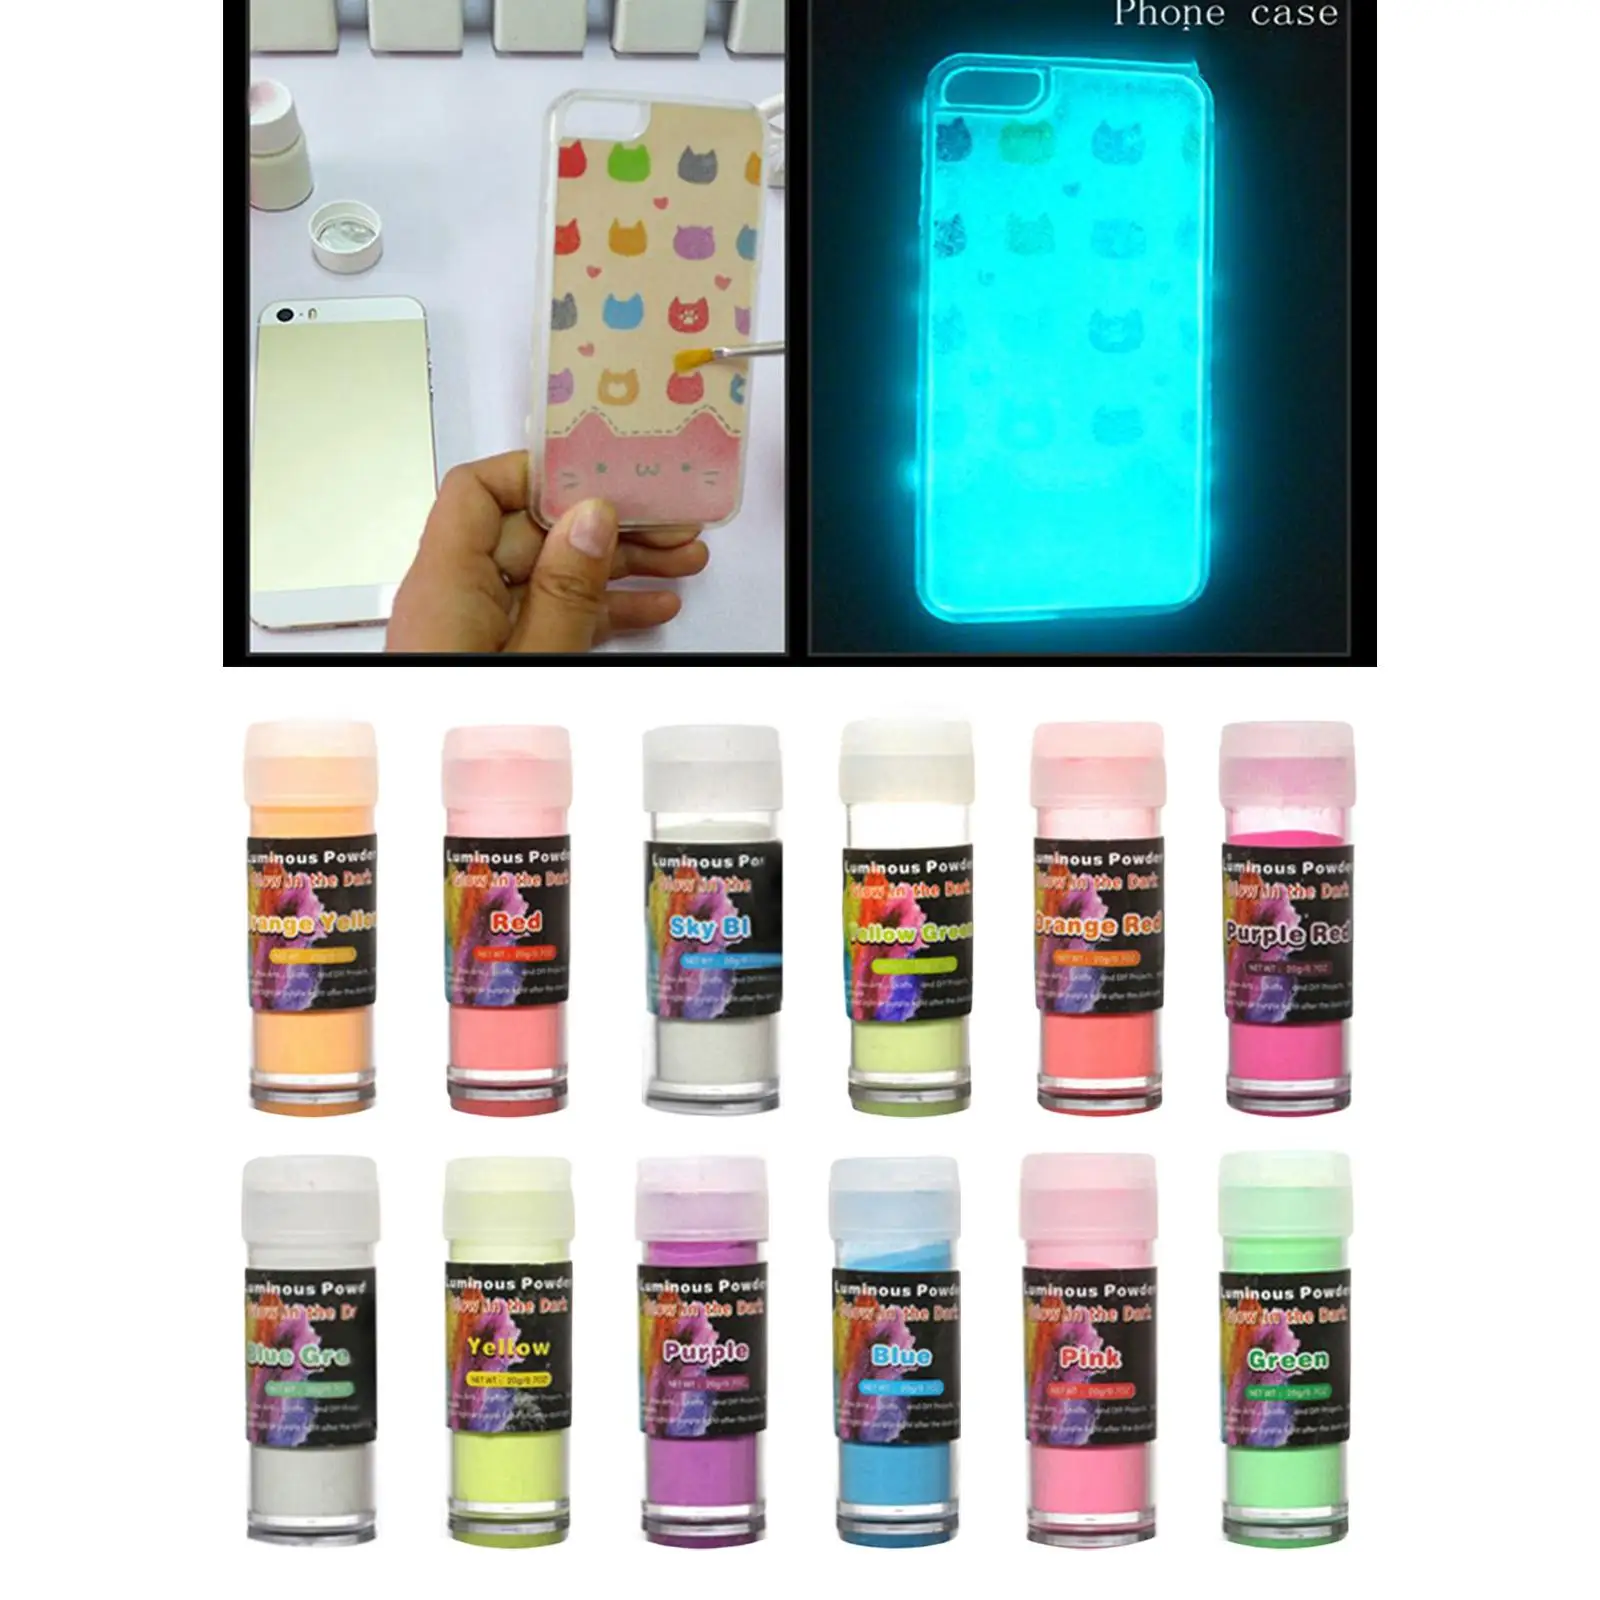 12x Luminous Powder 20G/Bottle Glow in The Dark Pigment Set for Slime Nails